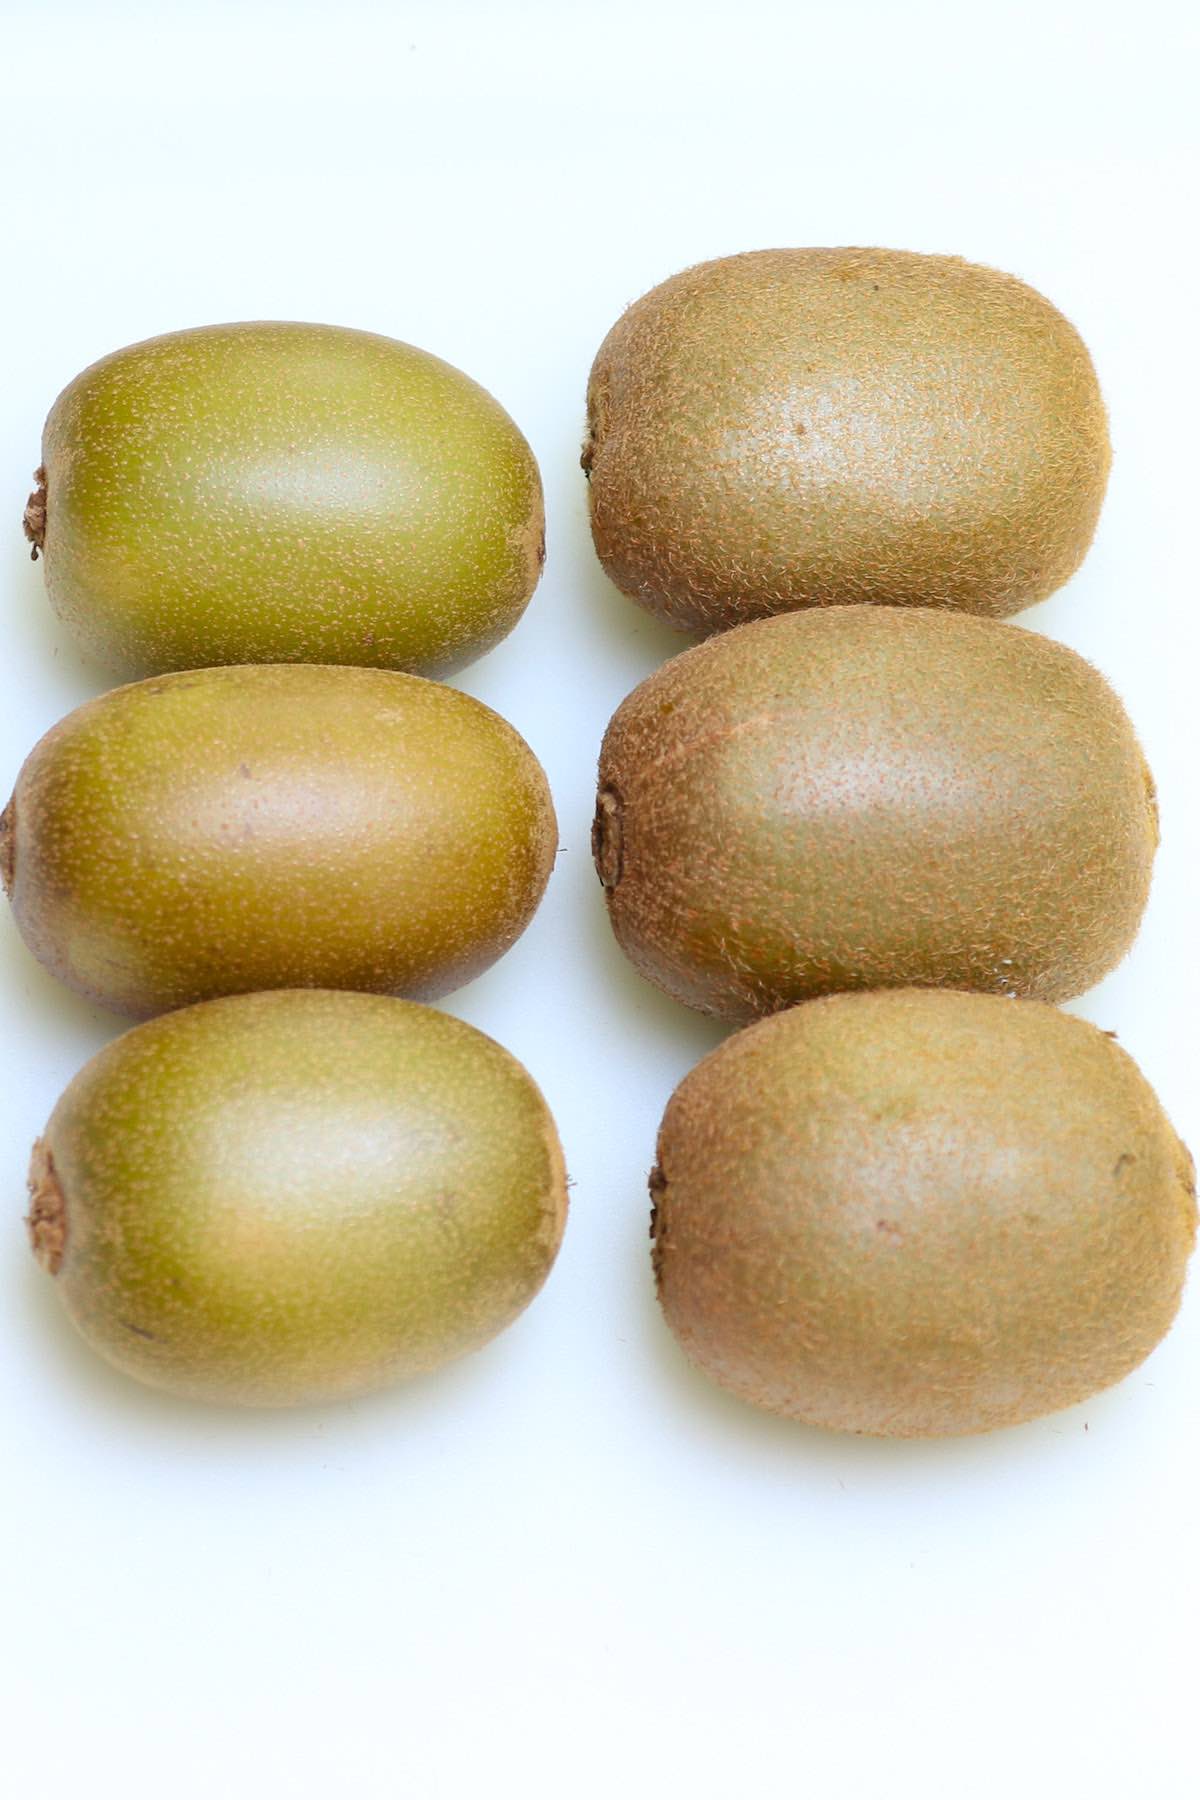 Side by side comparison of golden kiwi and green kiwi showing the differences in size, skin and color